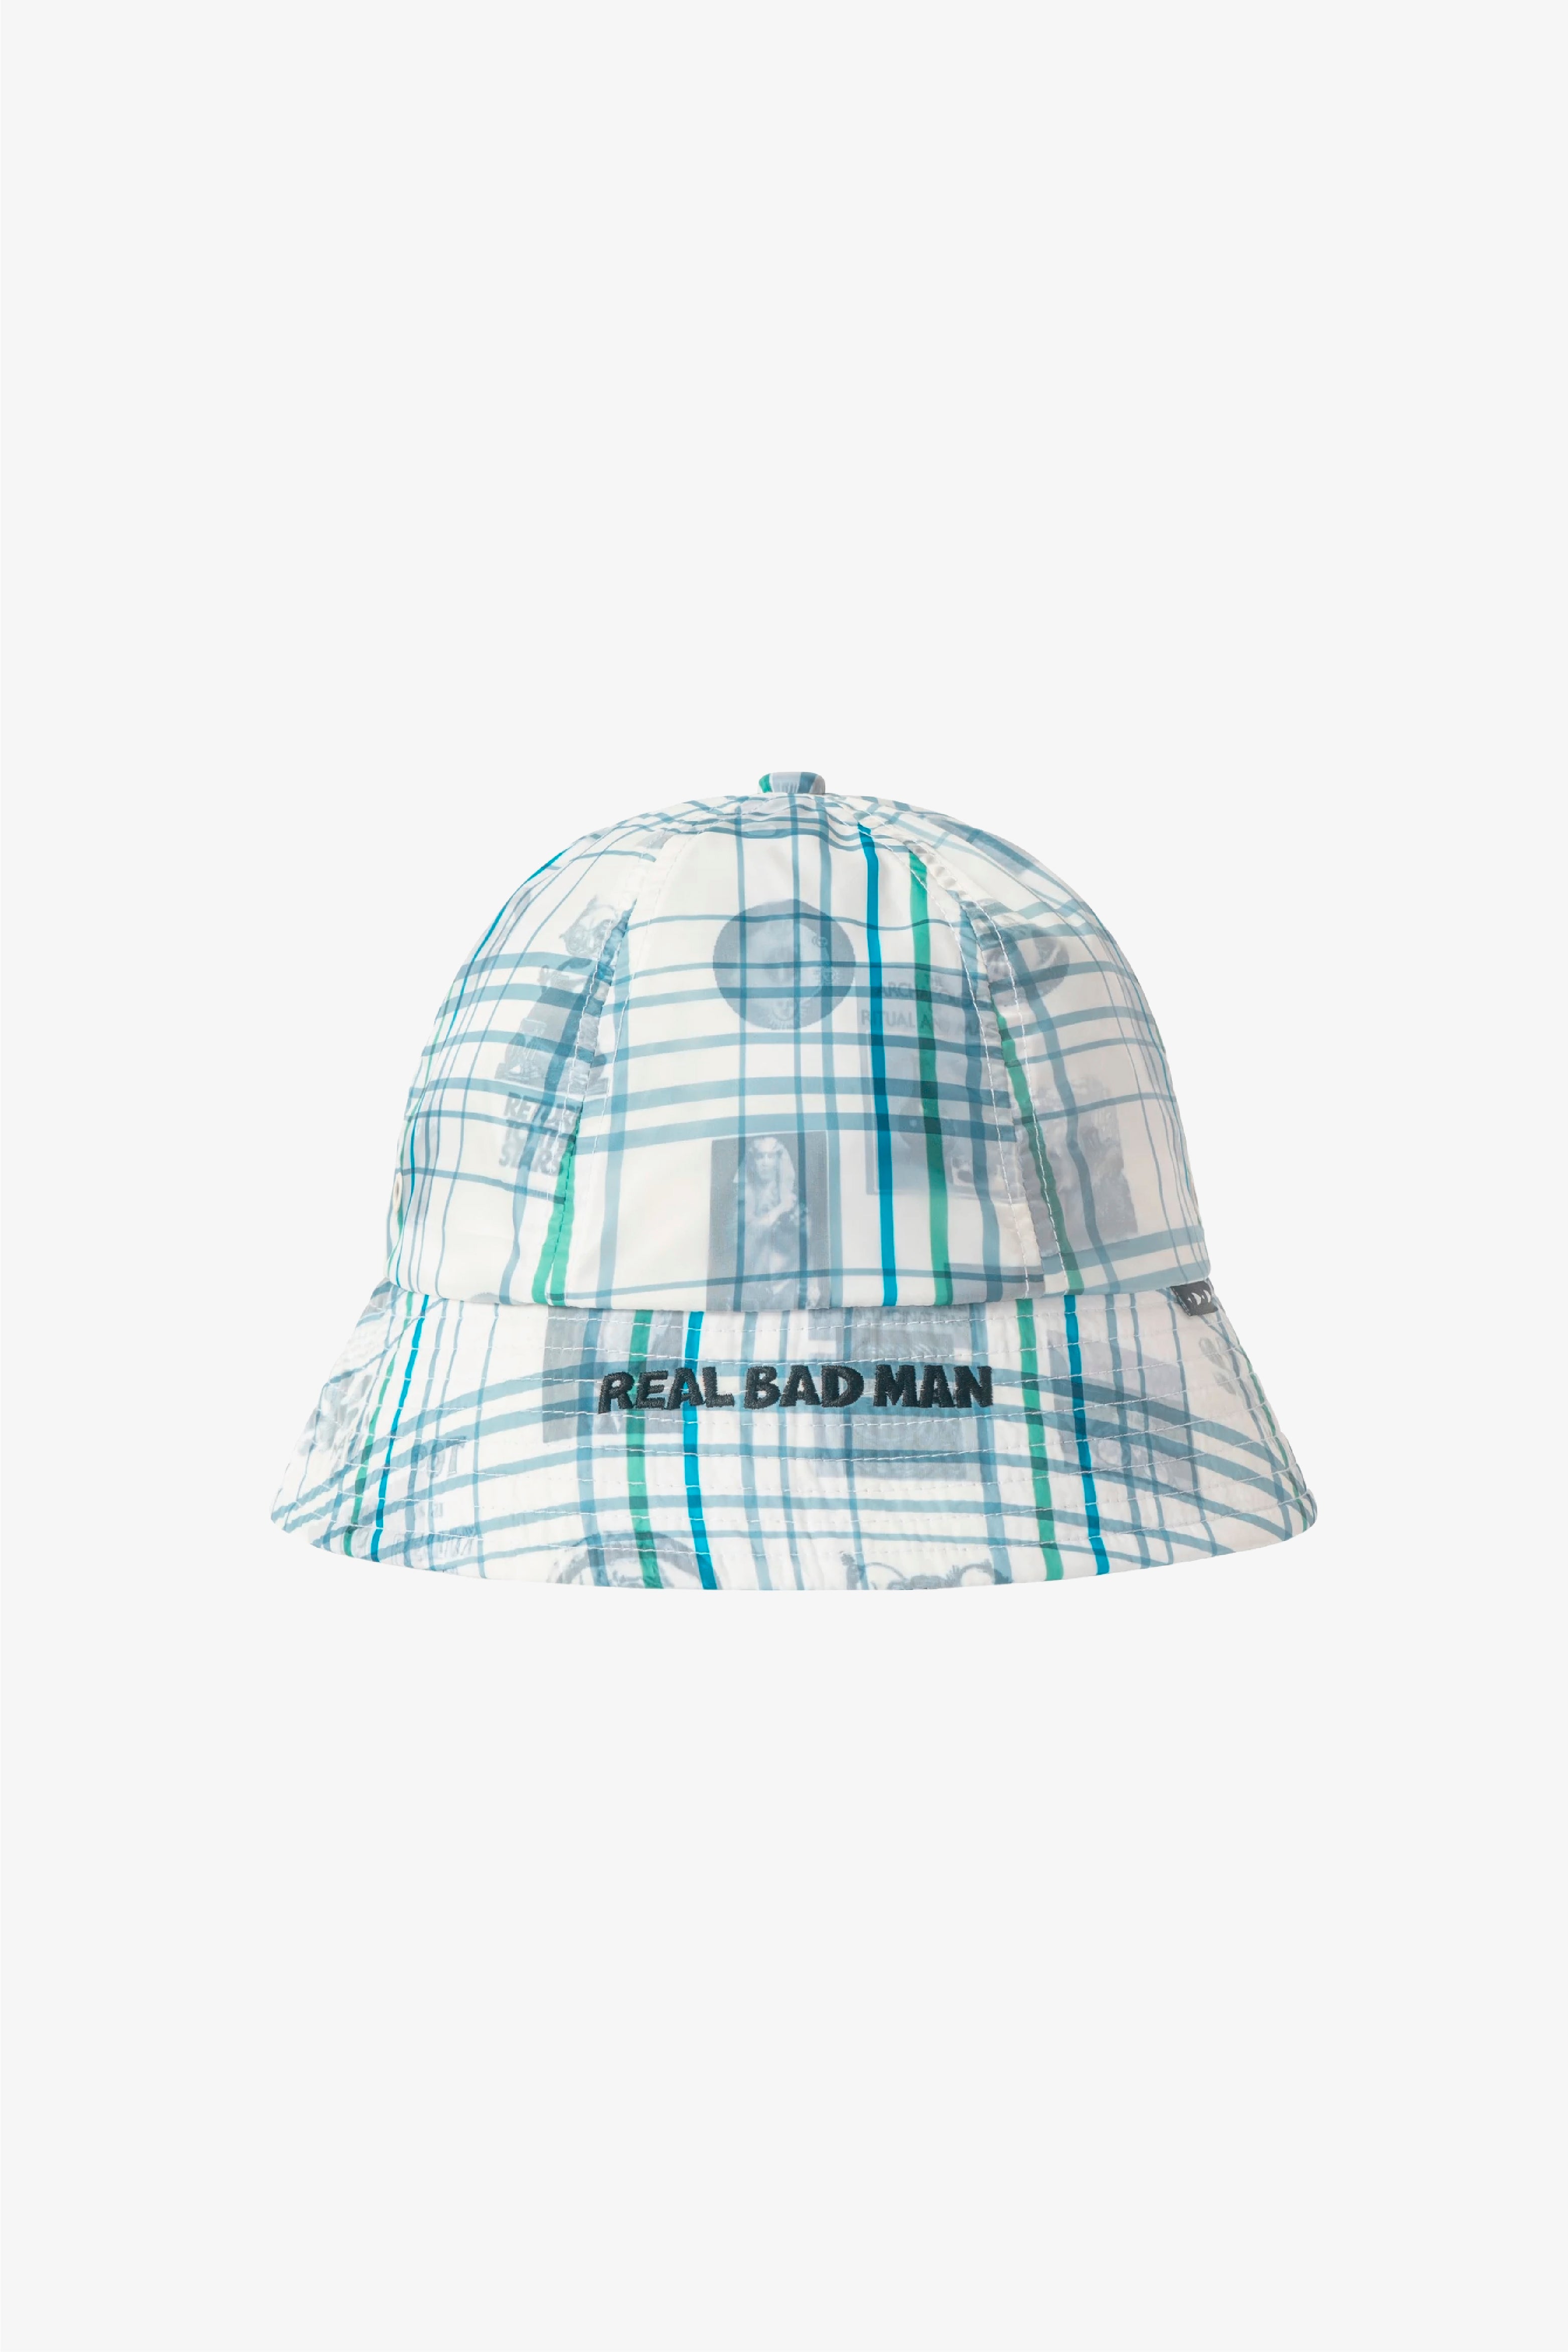 Selectshop FRAME - REAL BAD MAN Double Vision Bucket Hat All-Accessories Dubai